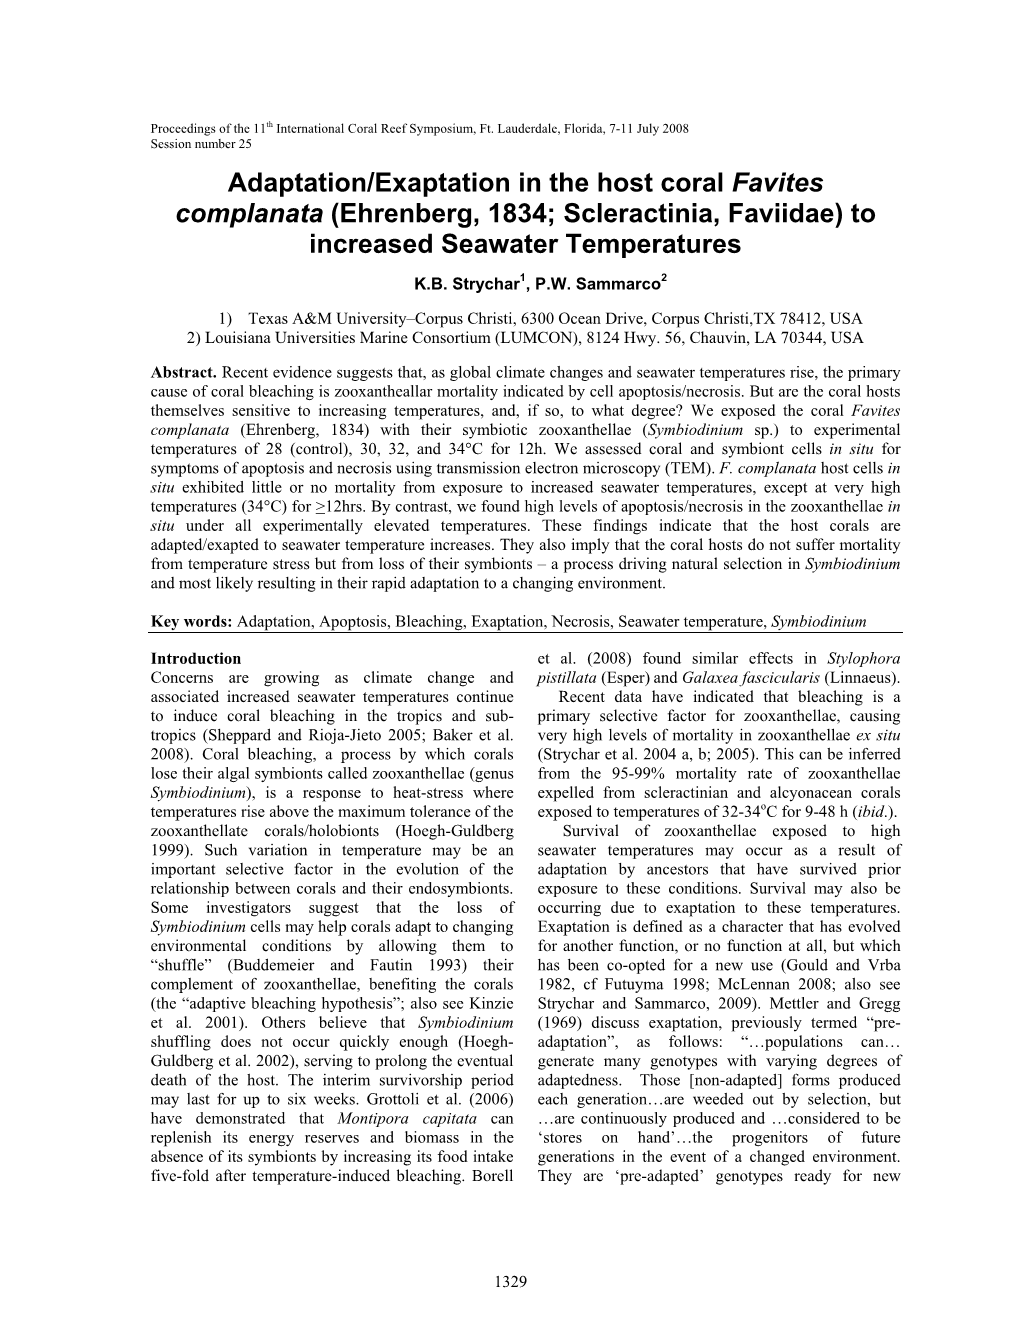 Adaptation/Exaptation in the Host Coral Favites Complanata (Ehrenberg, 1834; Scleractinia, Faviidae) to Increased Seawater Temperatures